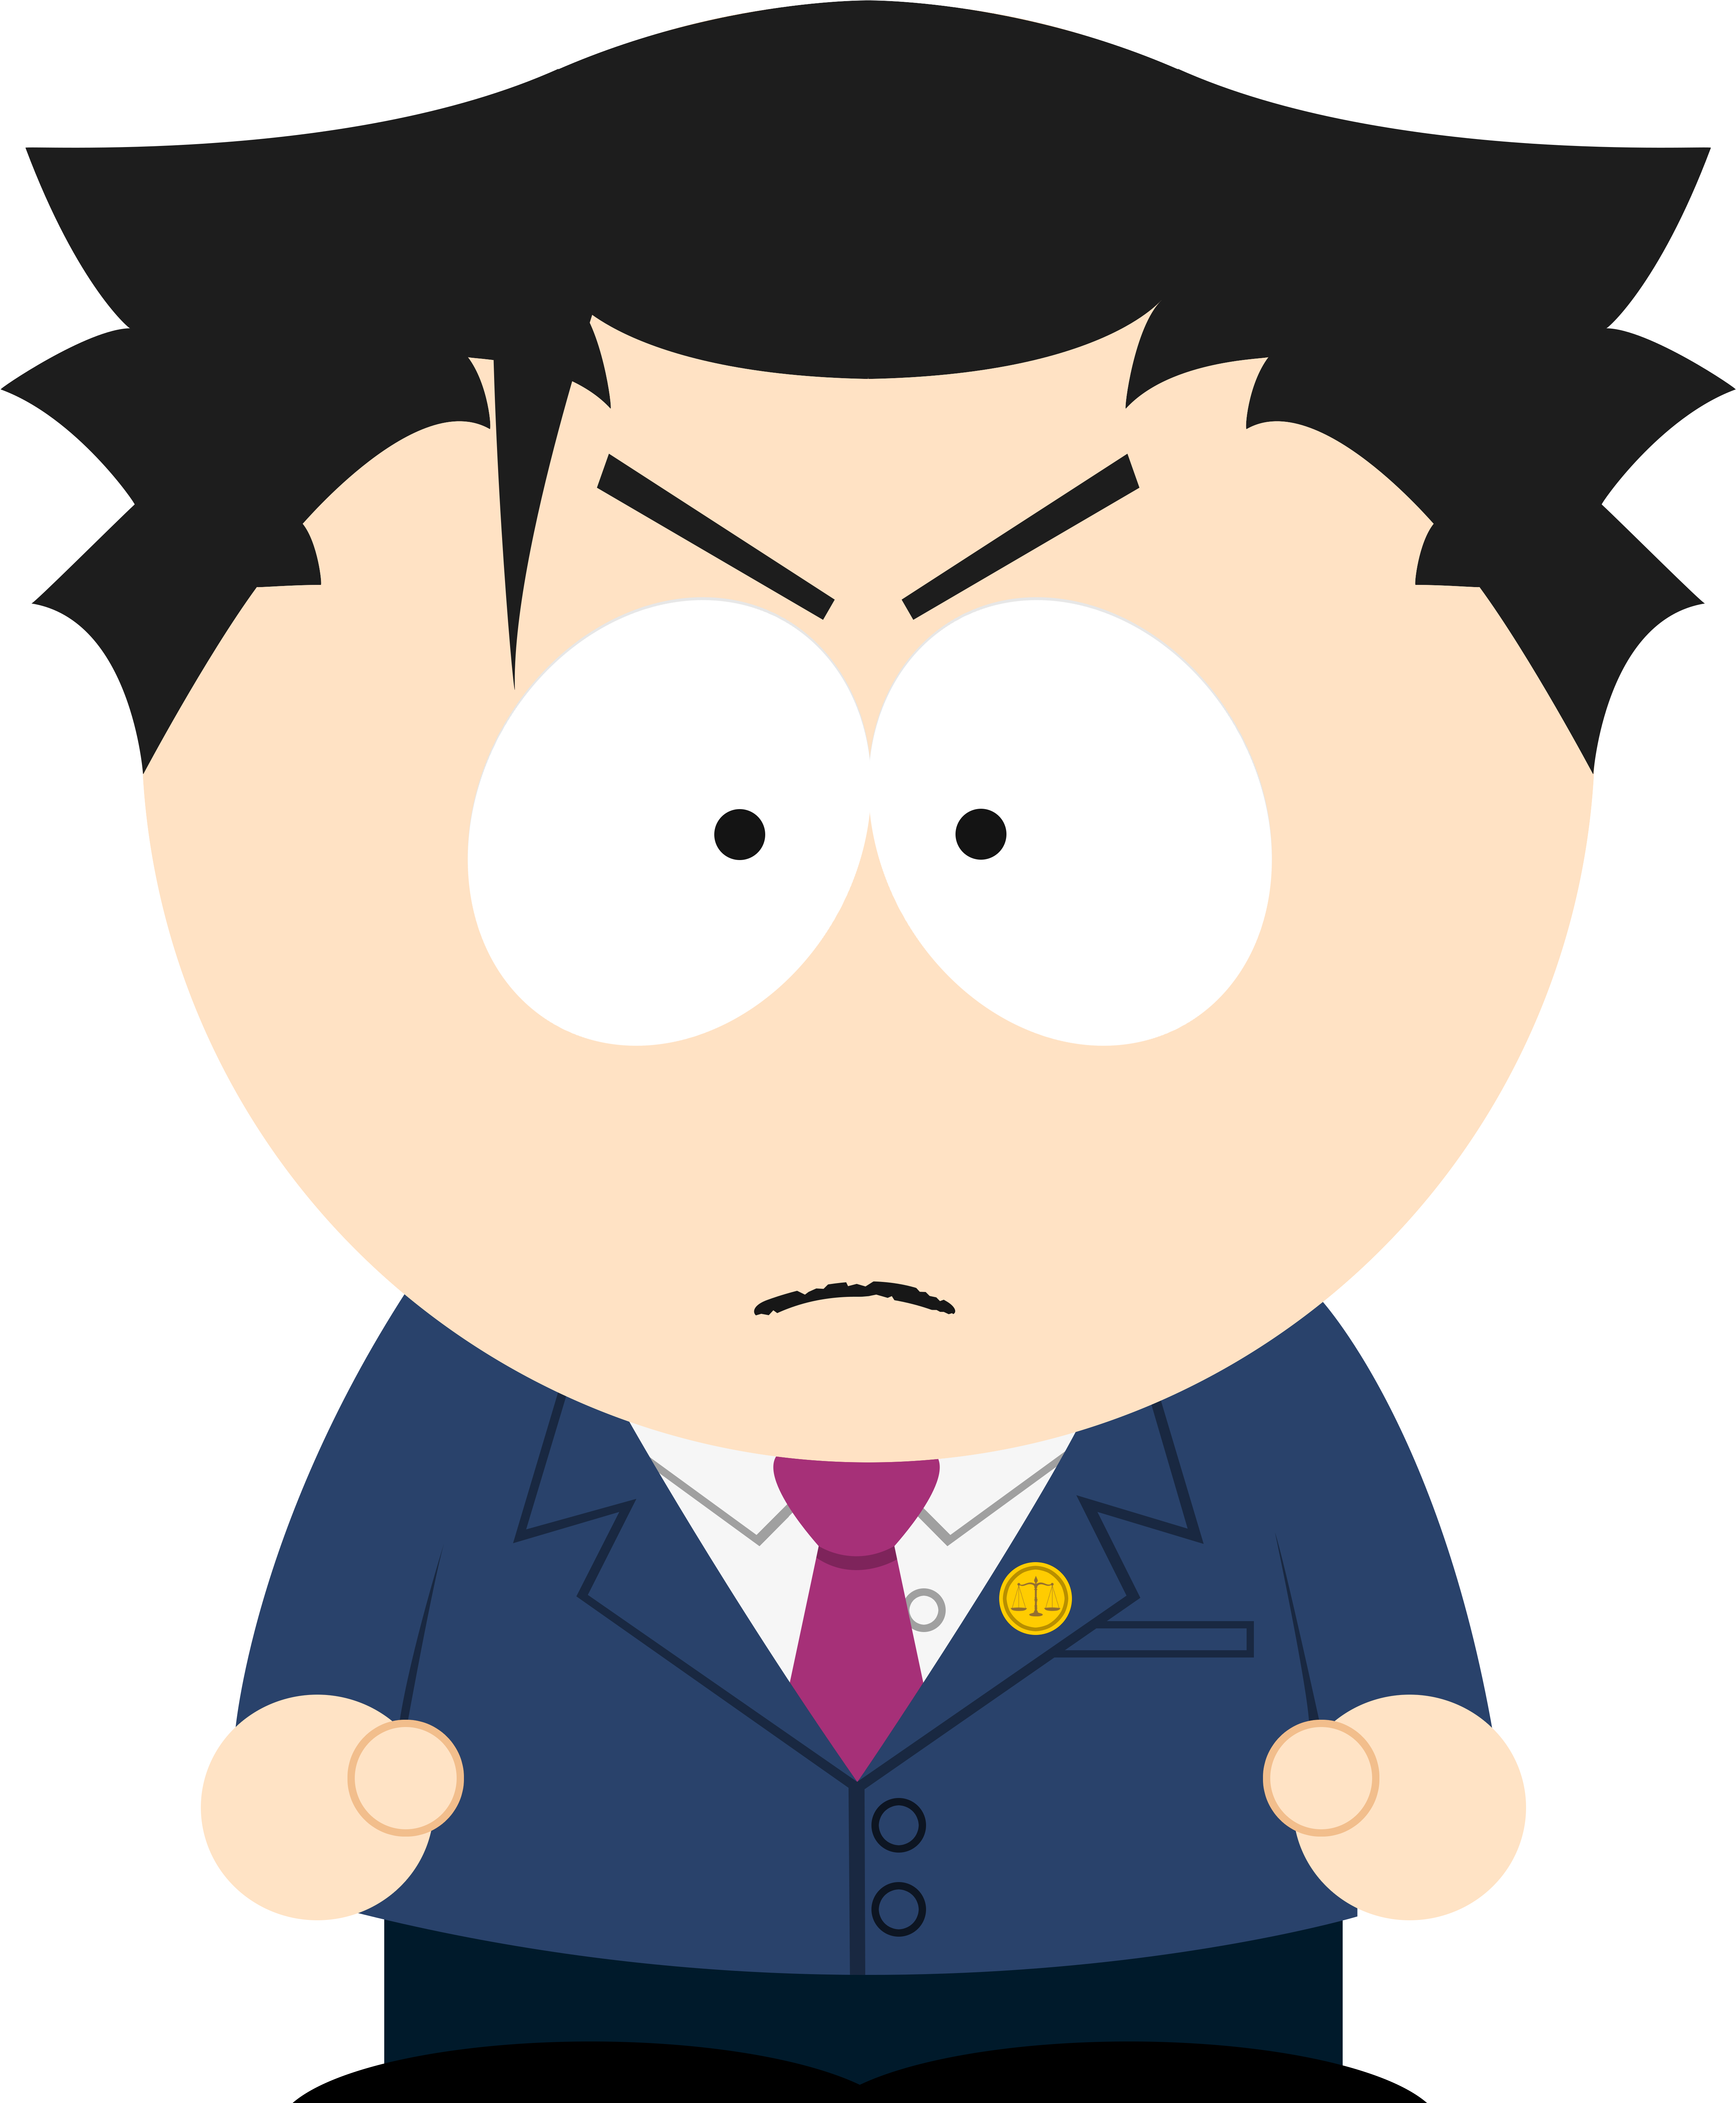 I Recreated Phoenix Wright In The South Park Style - Justin Hall South Park (5000x6000)